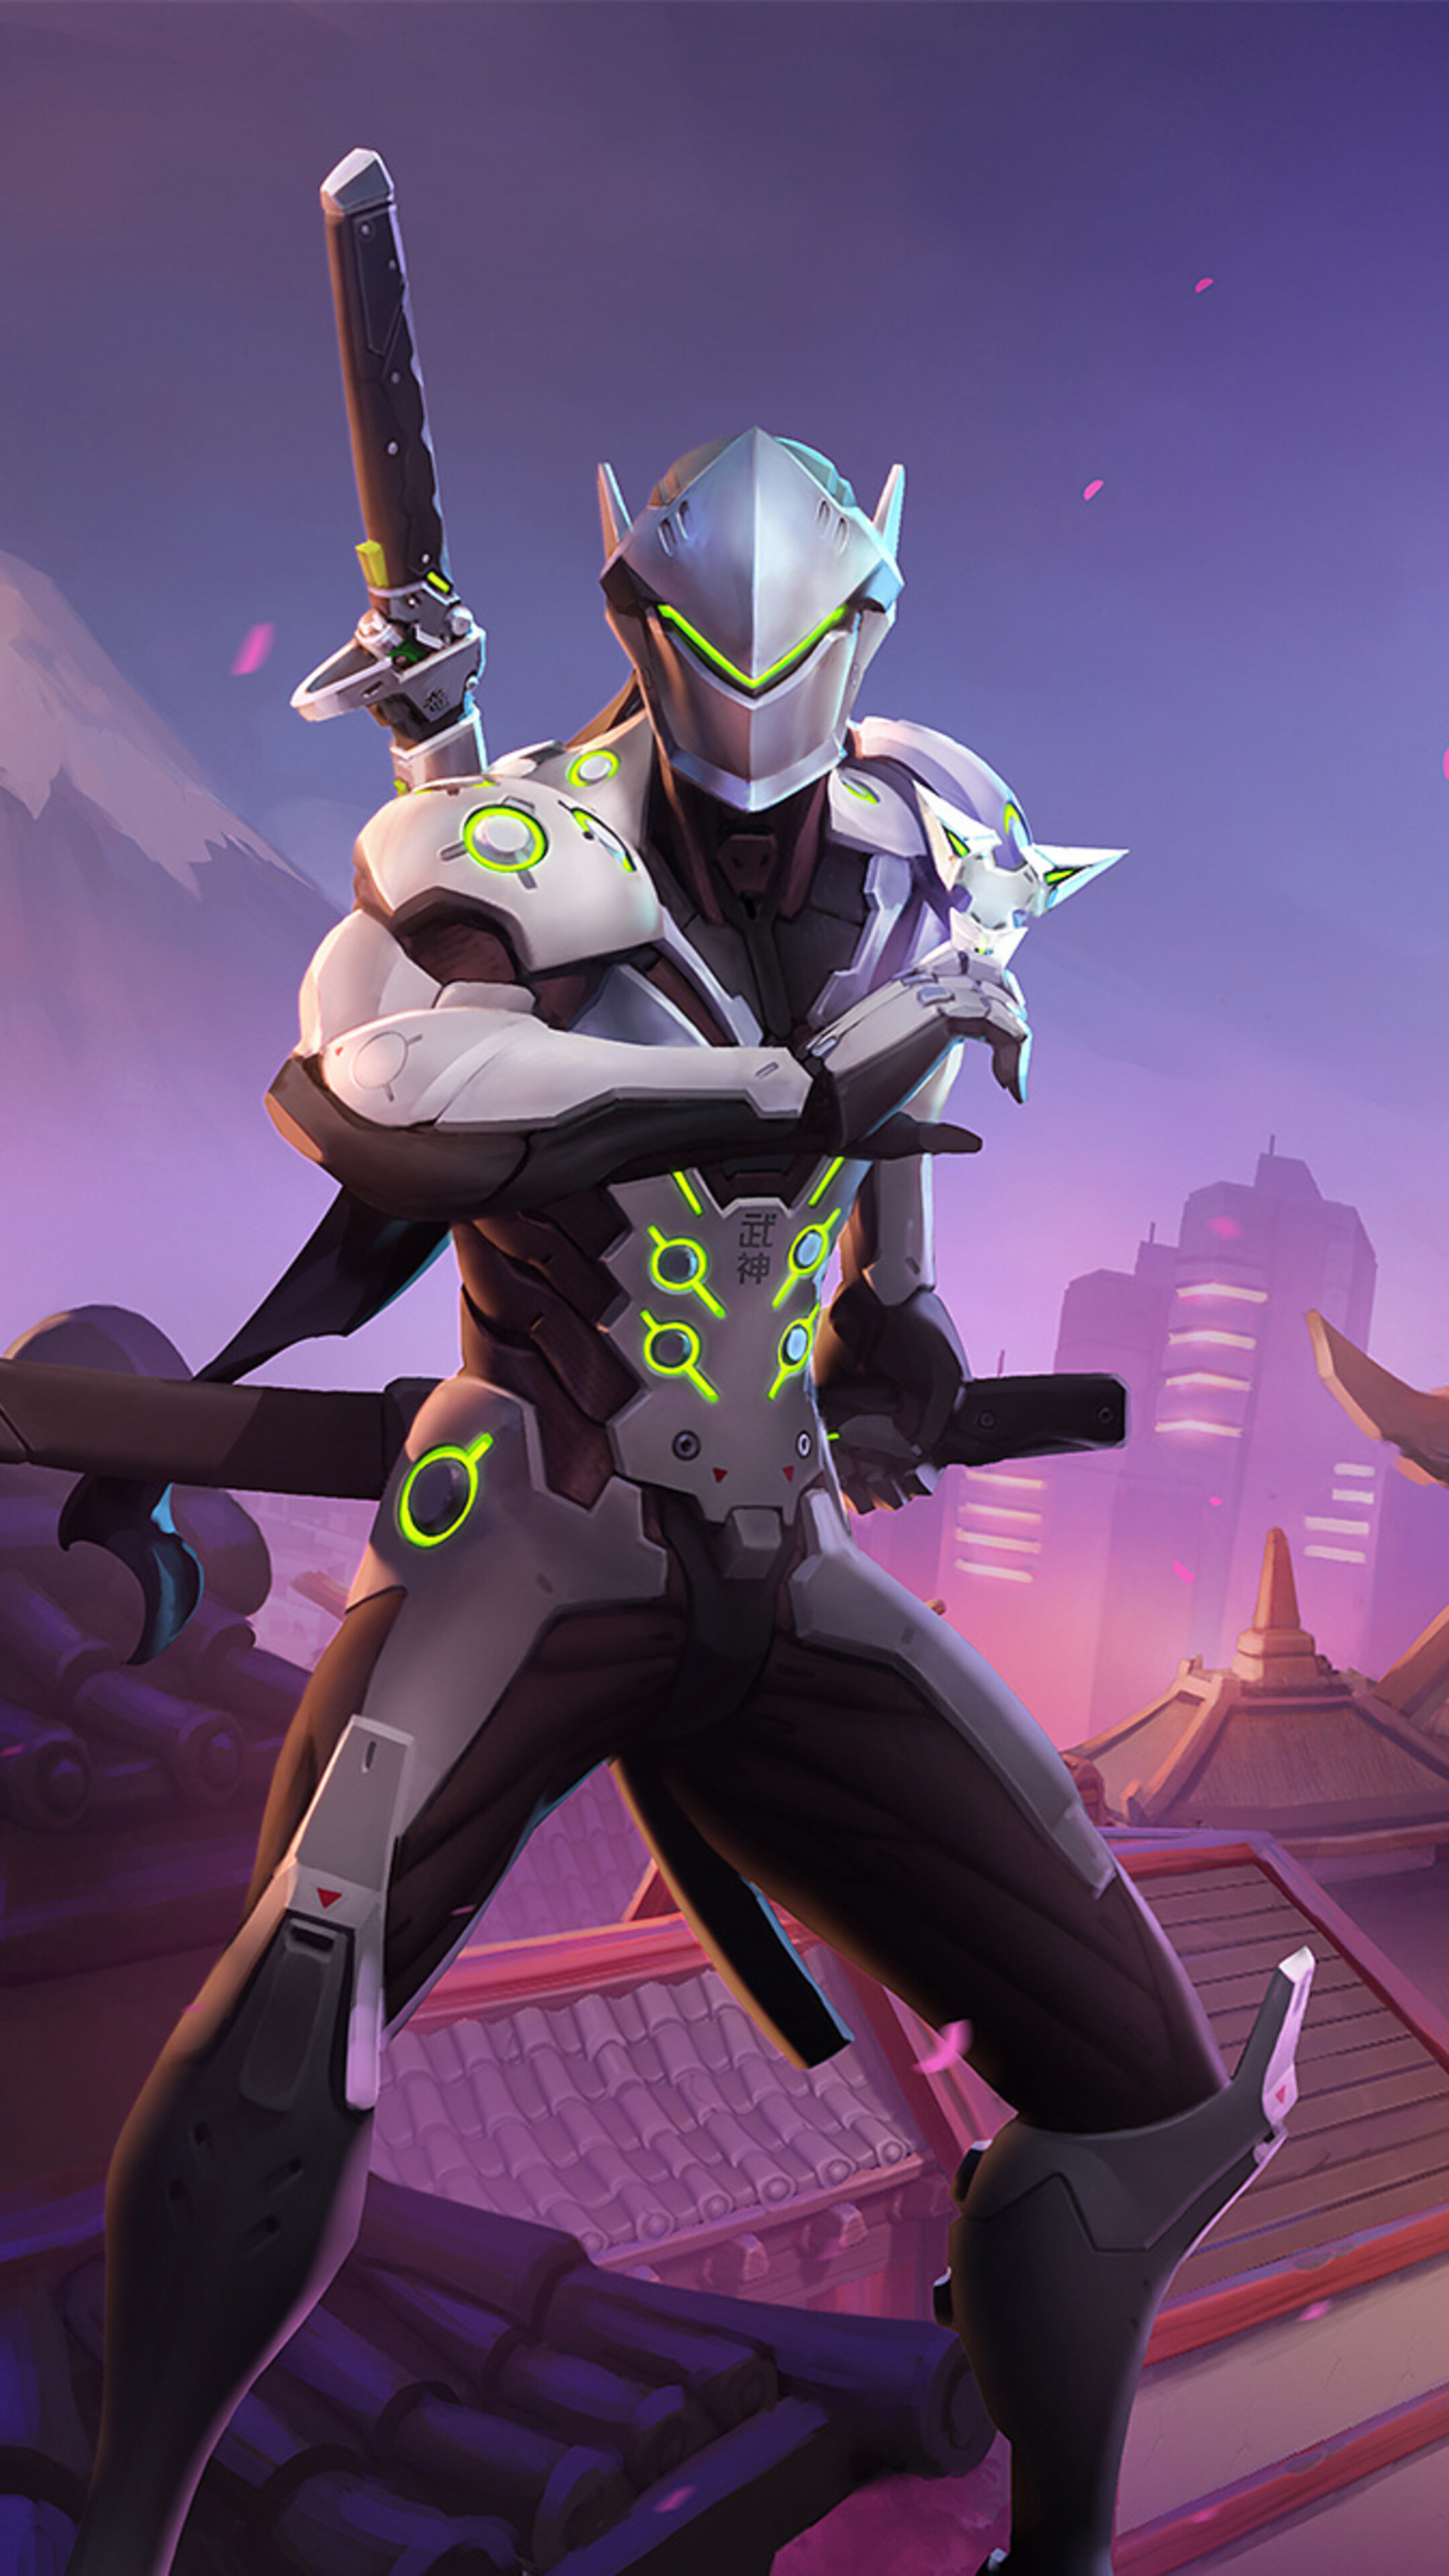 Genji: Overwatch, Dashes straight forward dealing damage to all enemies he passes through with Swift Strike. 2160x3840 4K Background.